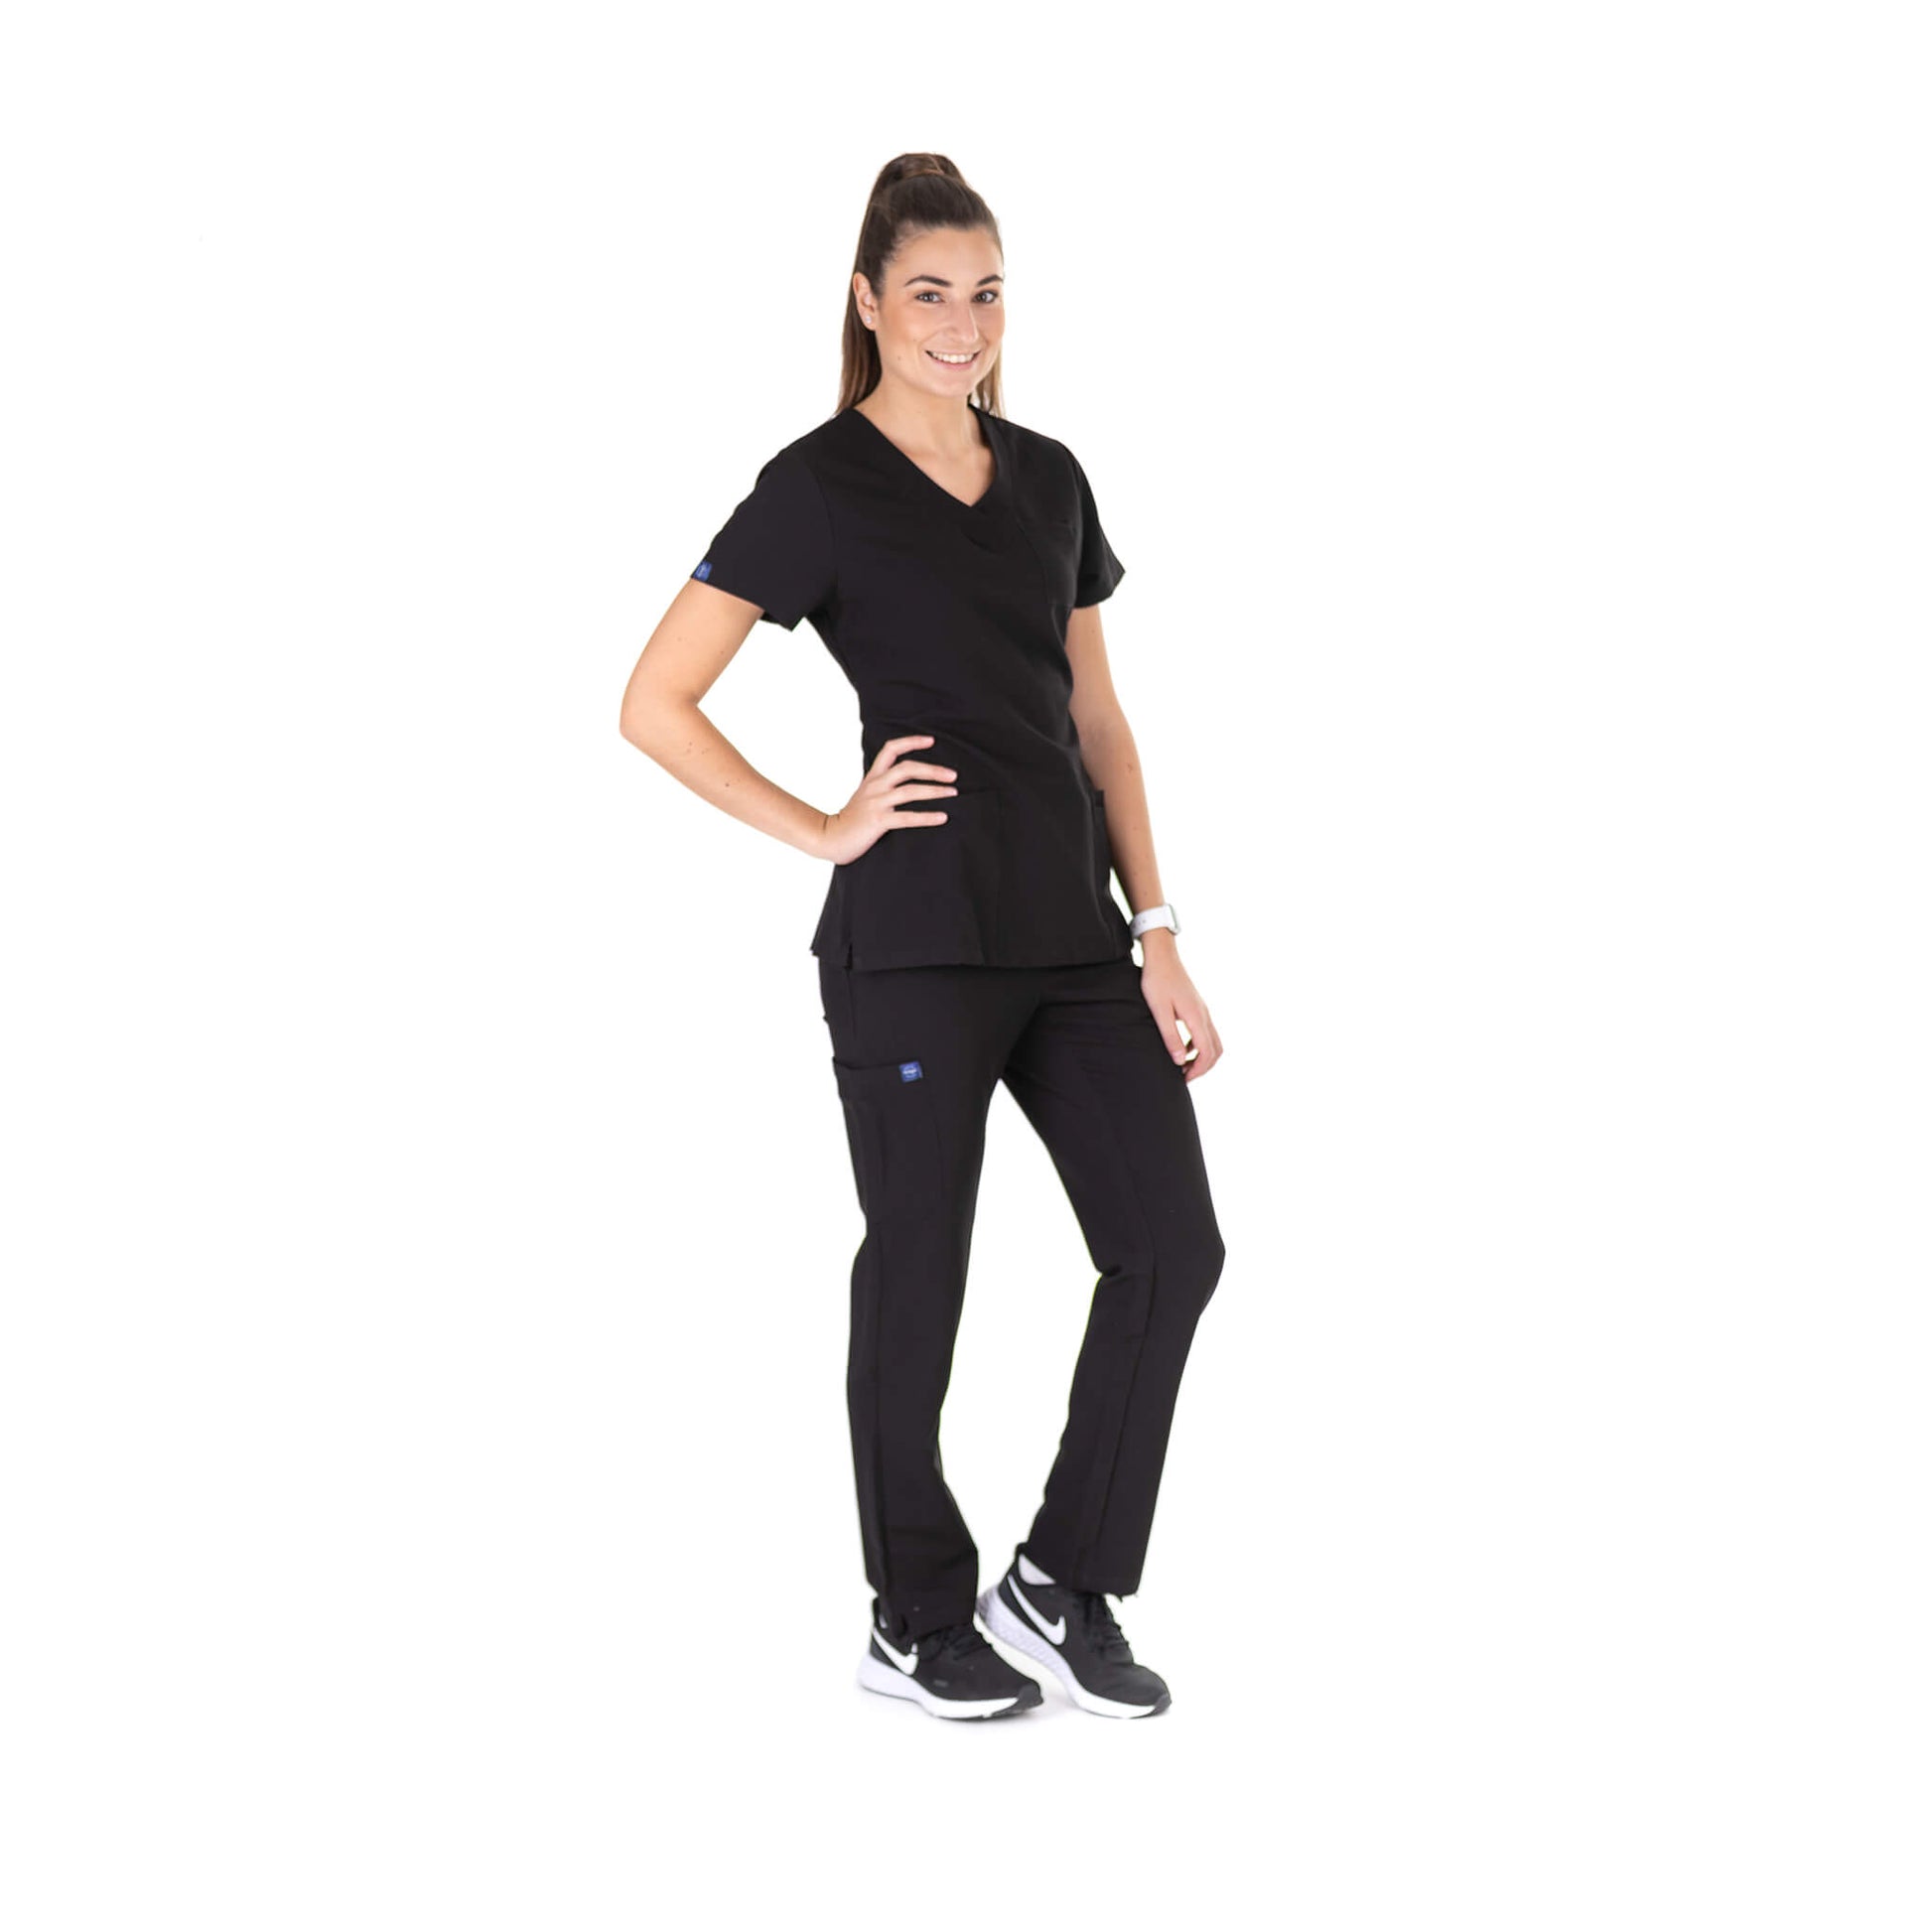 Shop Black Medical Scrubs from Fit Right Medical Scrubs